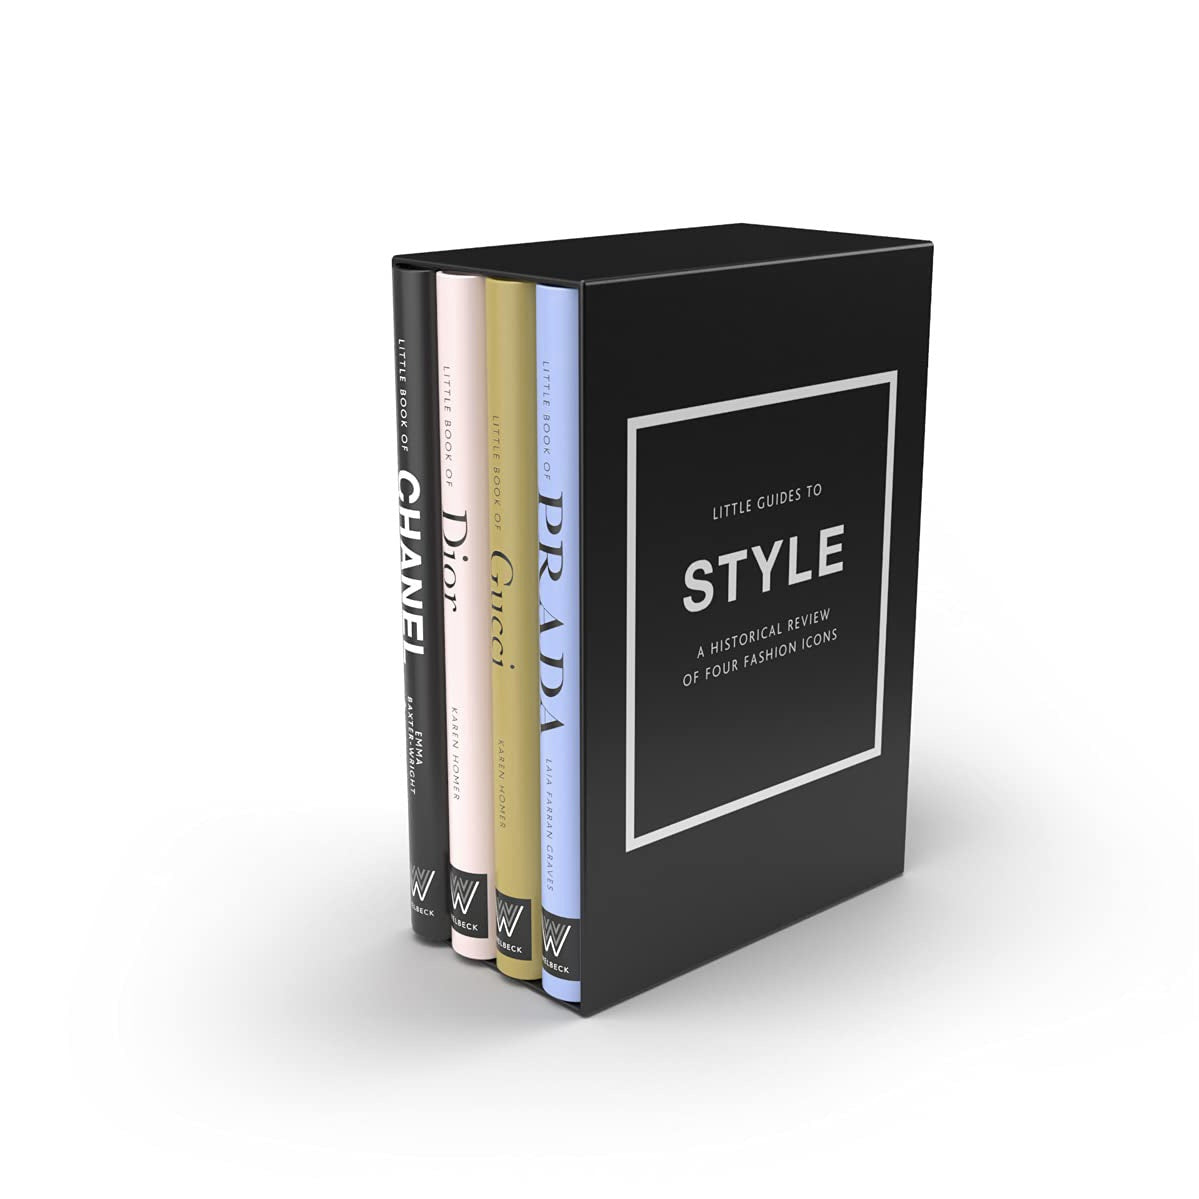 LITTLE GUIDES TO STYLE